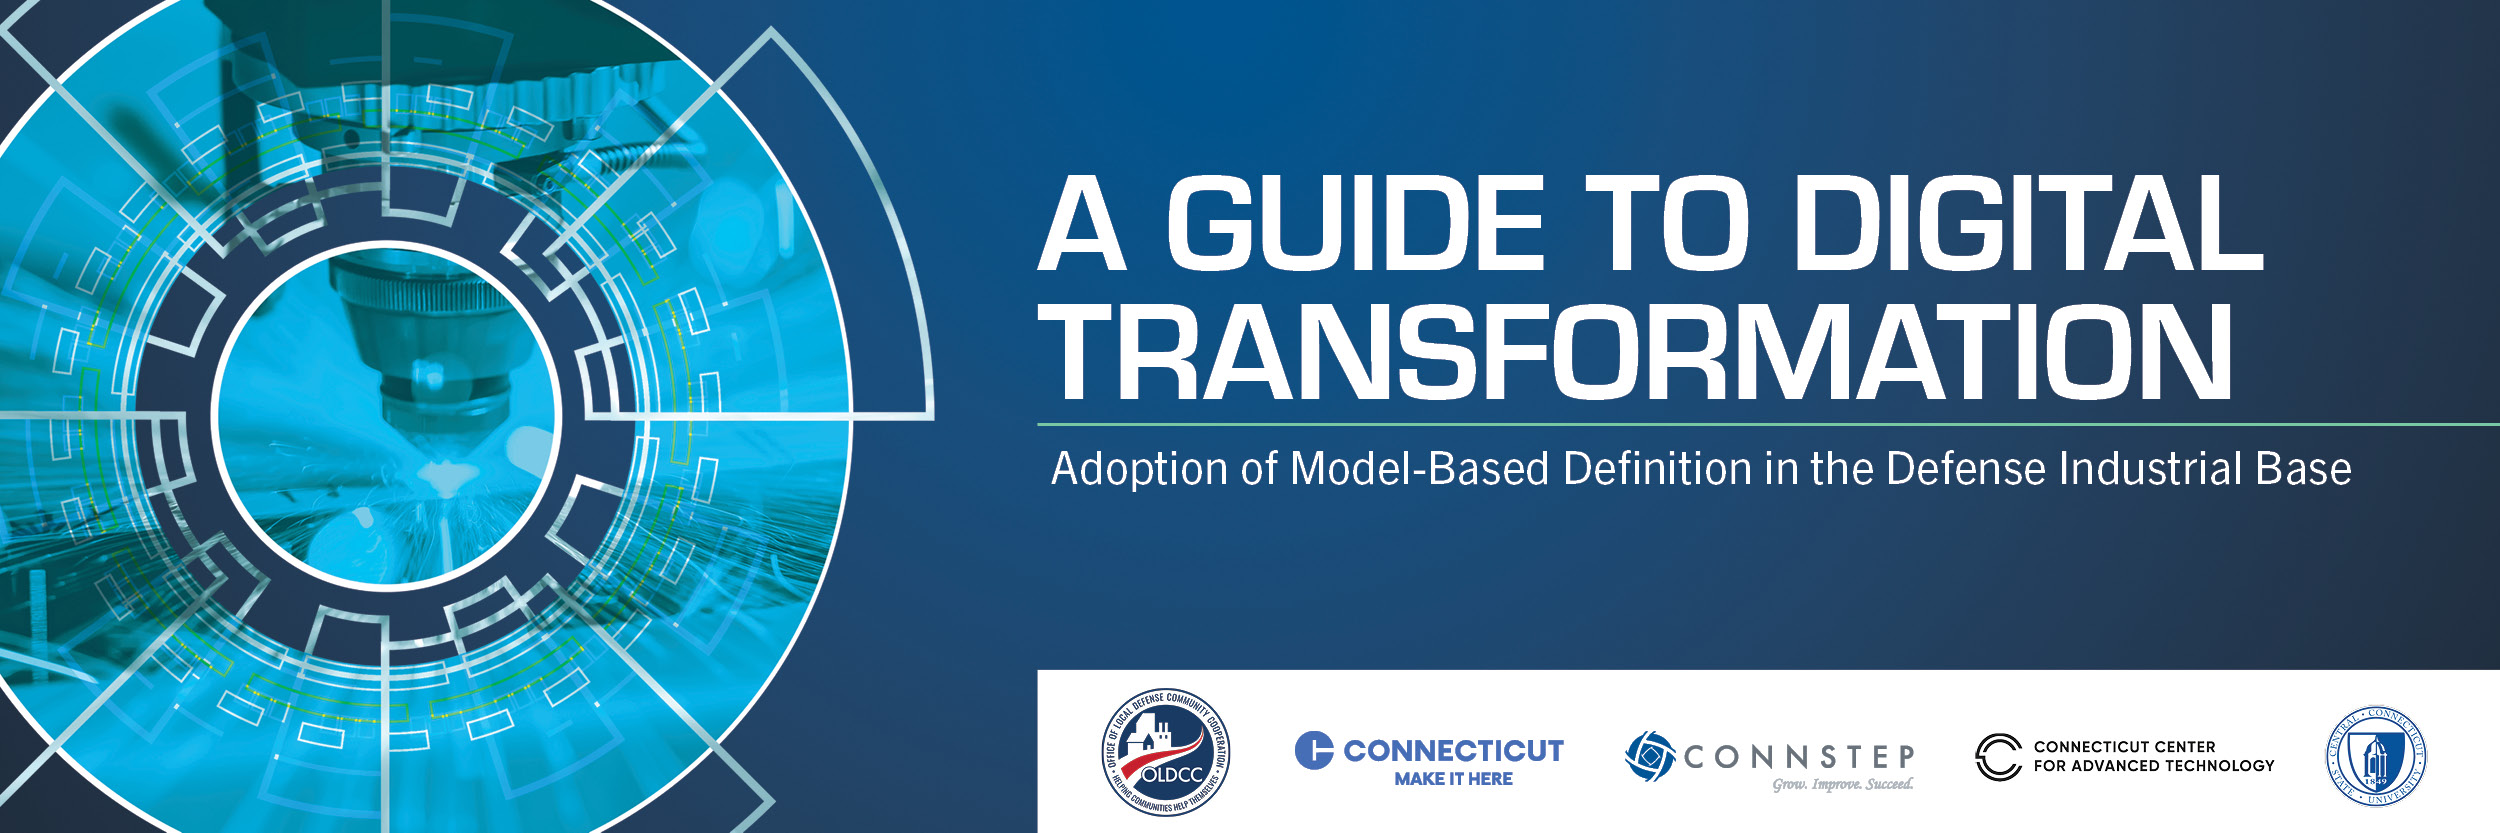 A Guide to Digital Transformation Hosted by CT State Community College Naugatuck